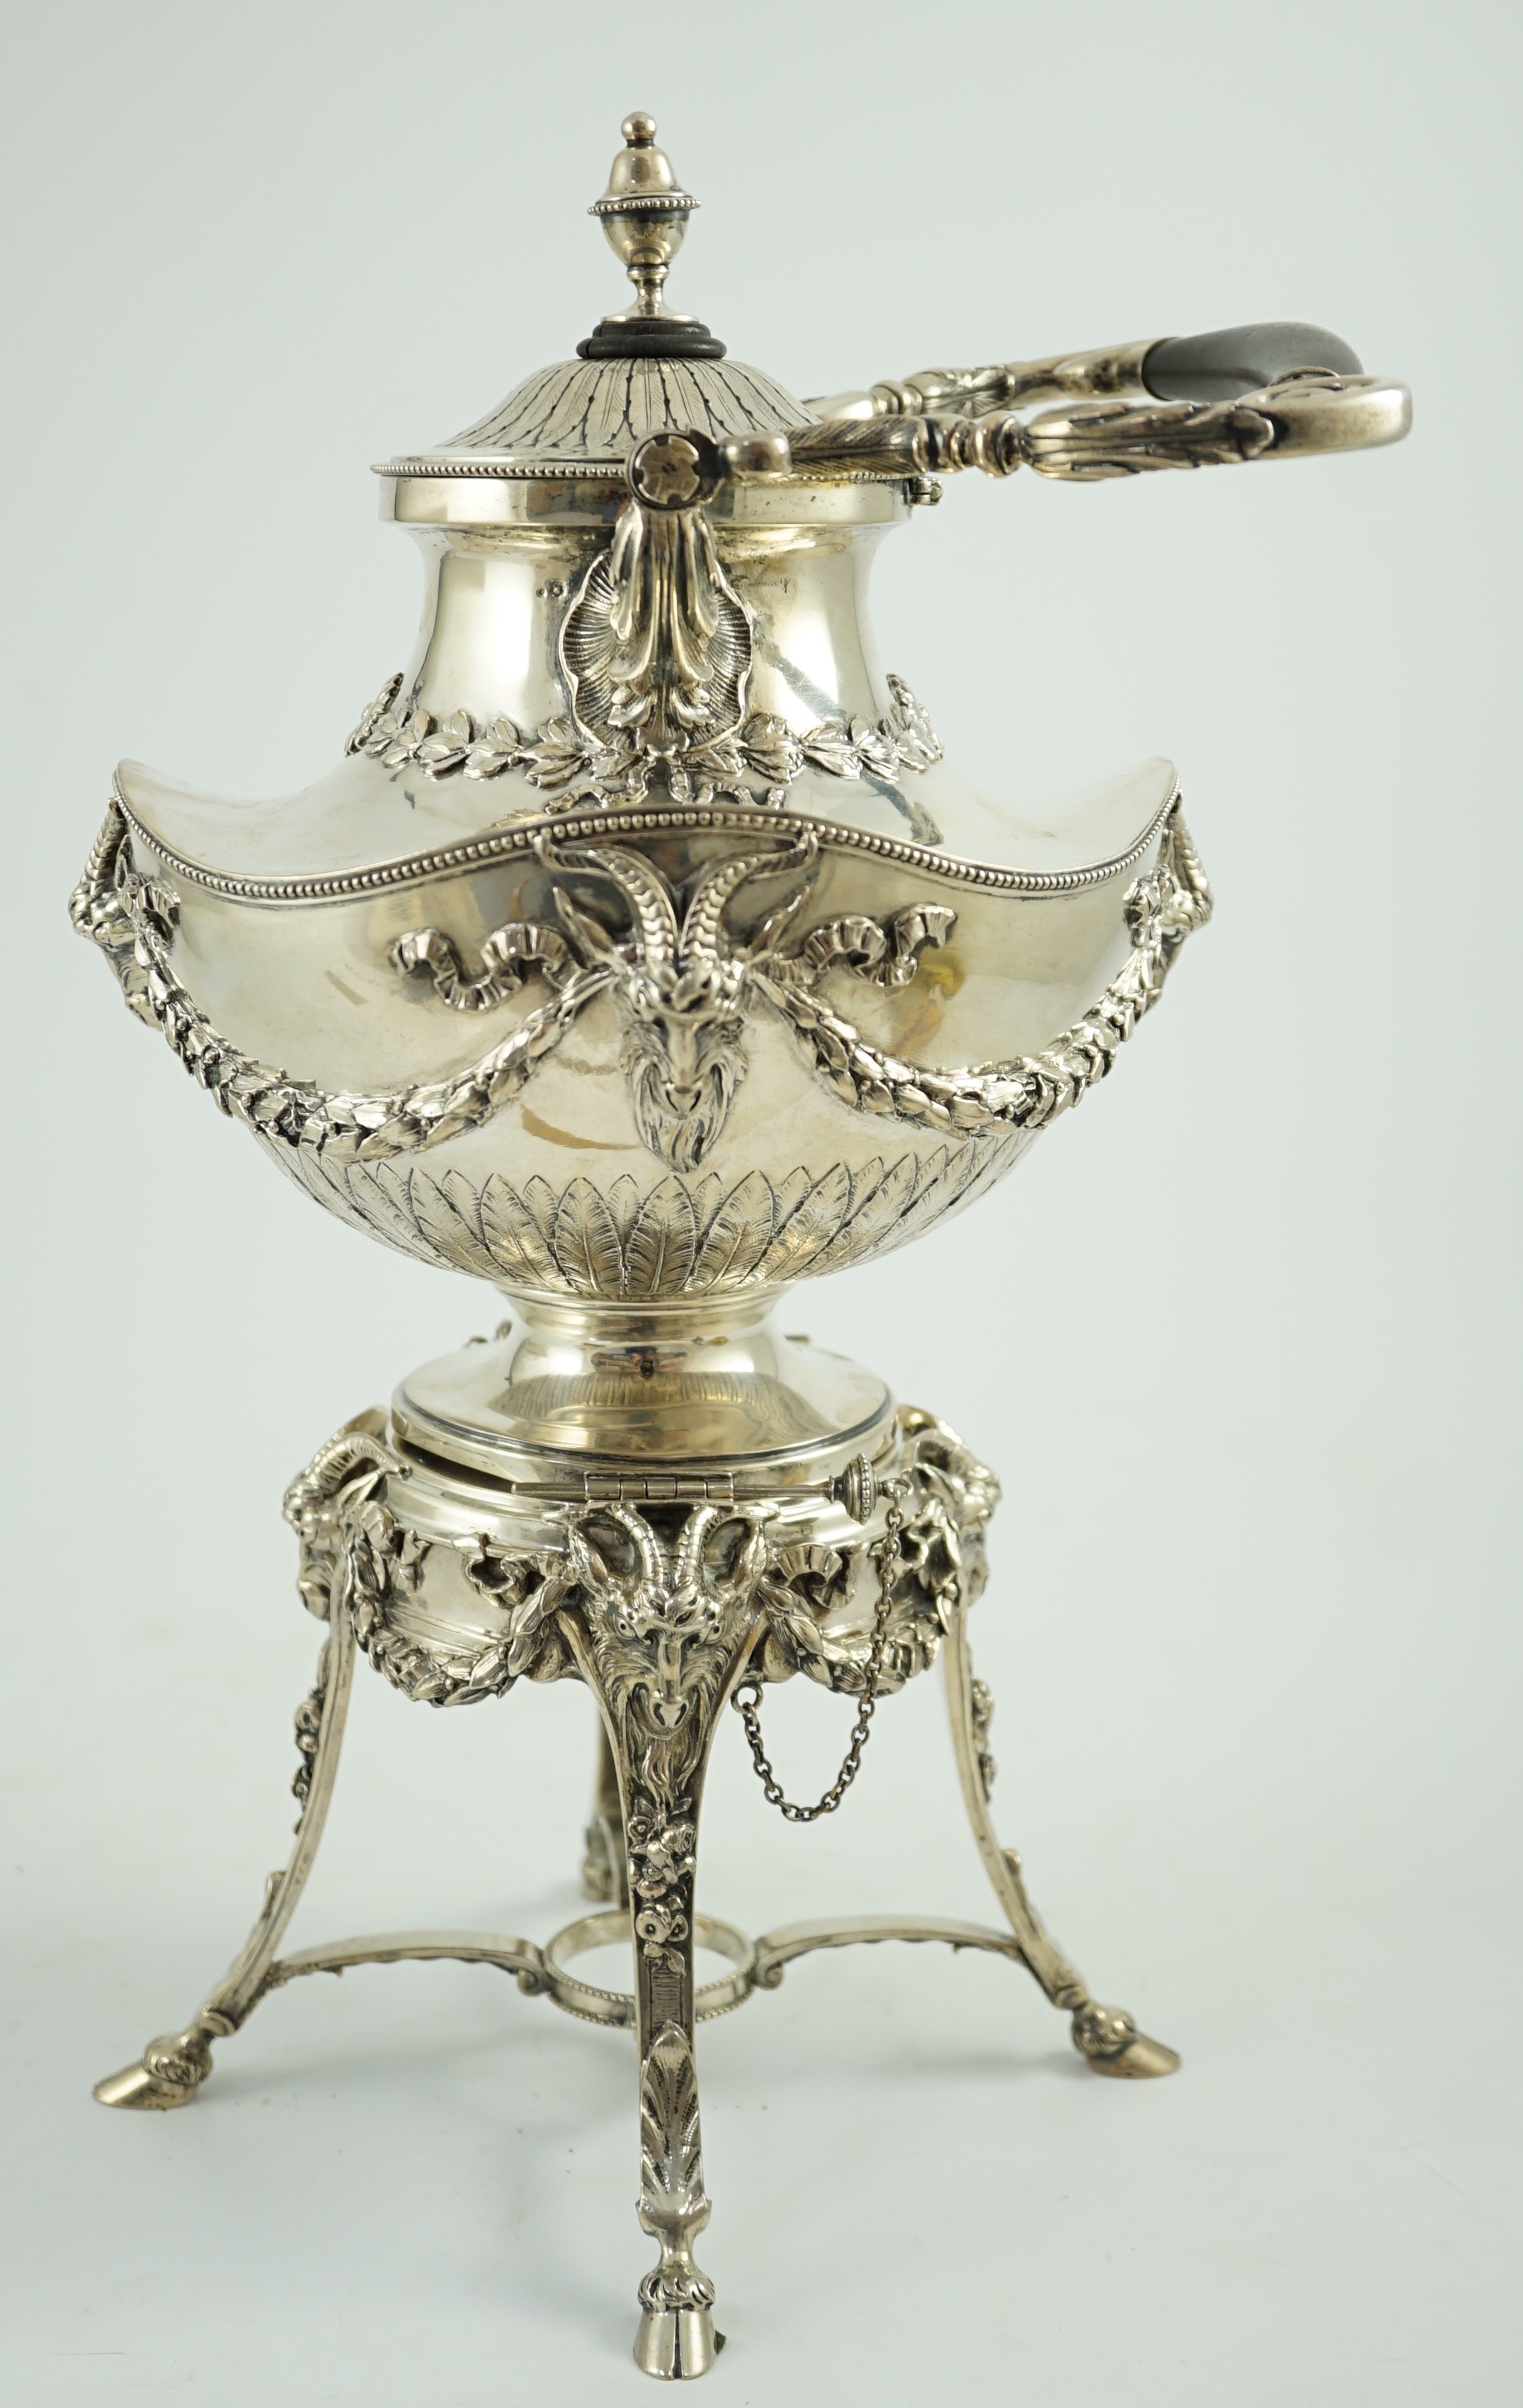 An ornate late 19th/early 20th century Austro-Hungarian 800 standard silver tea kettle on stand